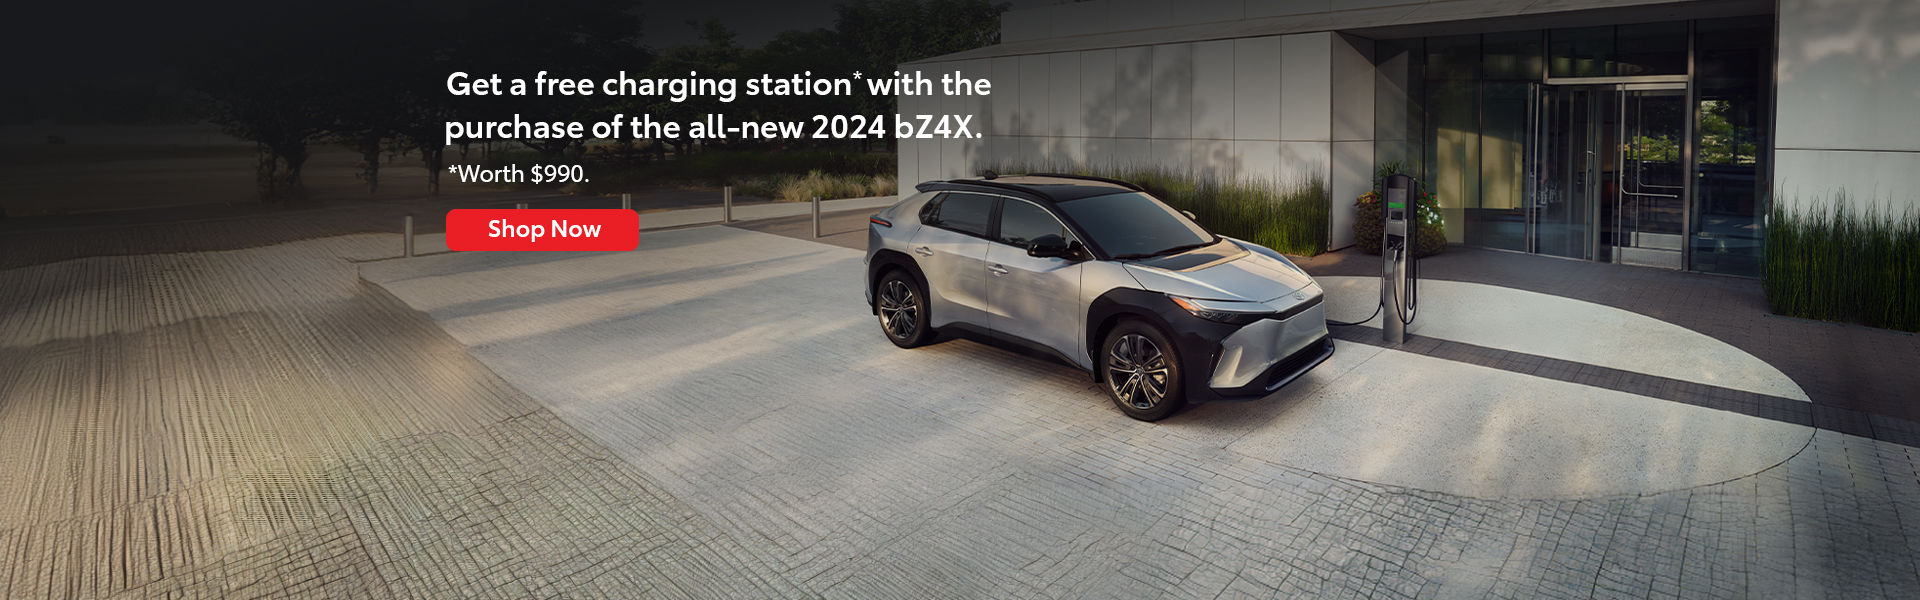 Get a free charging station* with the purchase of the all-new 2024 bZ4X.